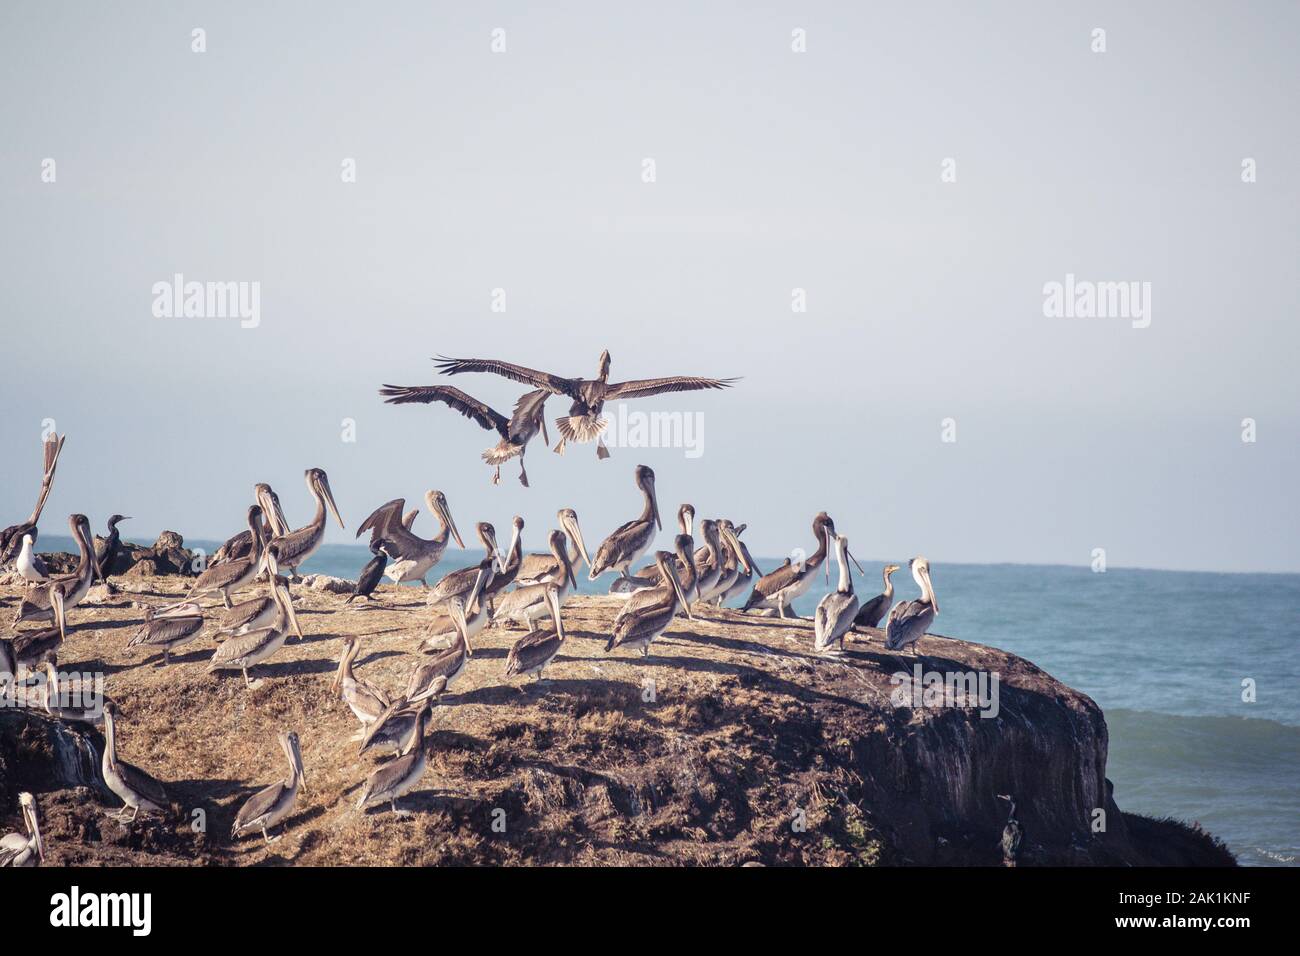 Large flock of Brown Pelicans on a rock in Pacific Ocean. Two pelicans in formation in flight - descending to land. Stock Photo